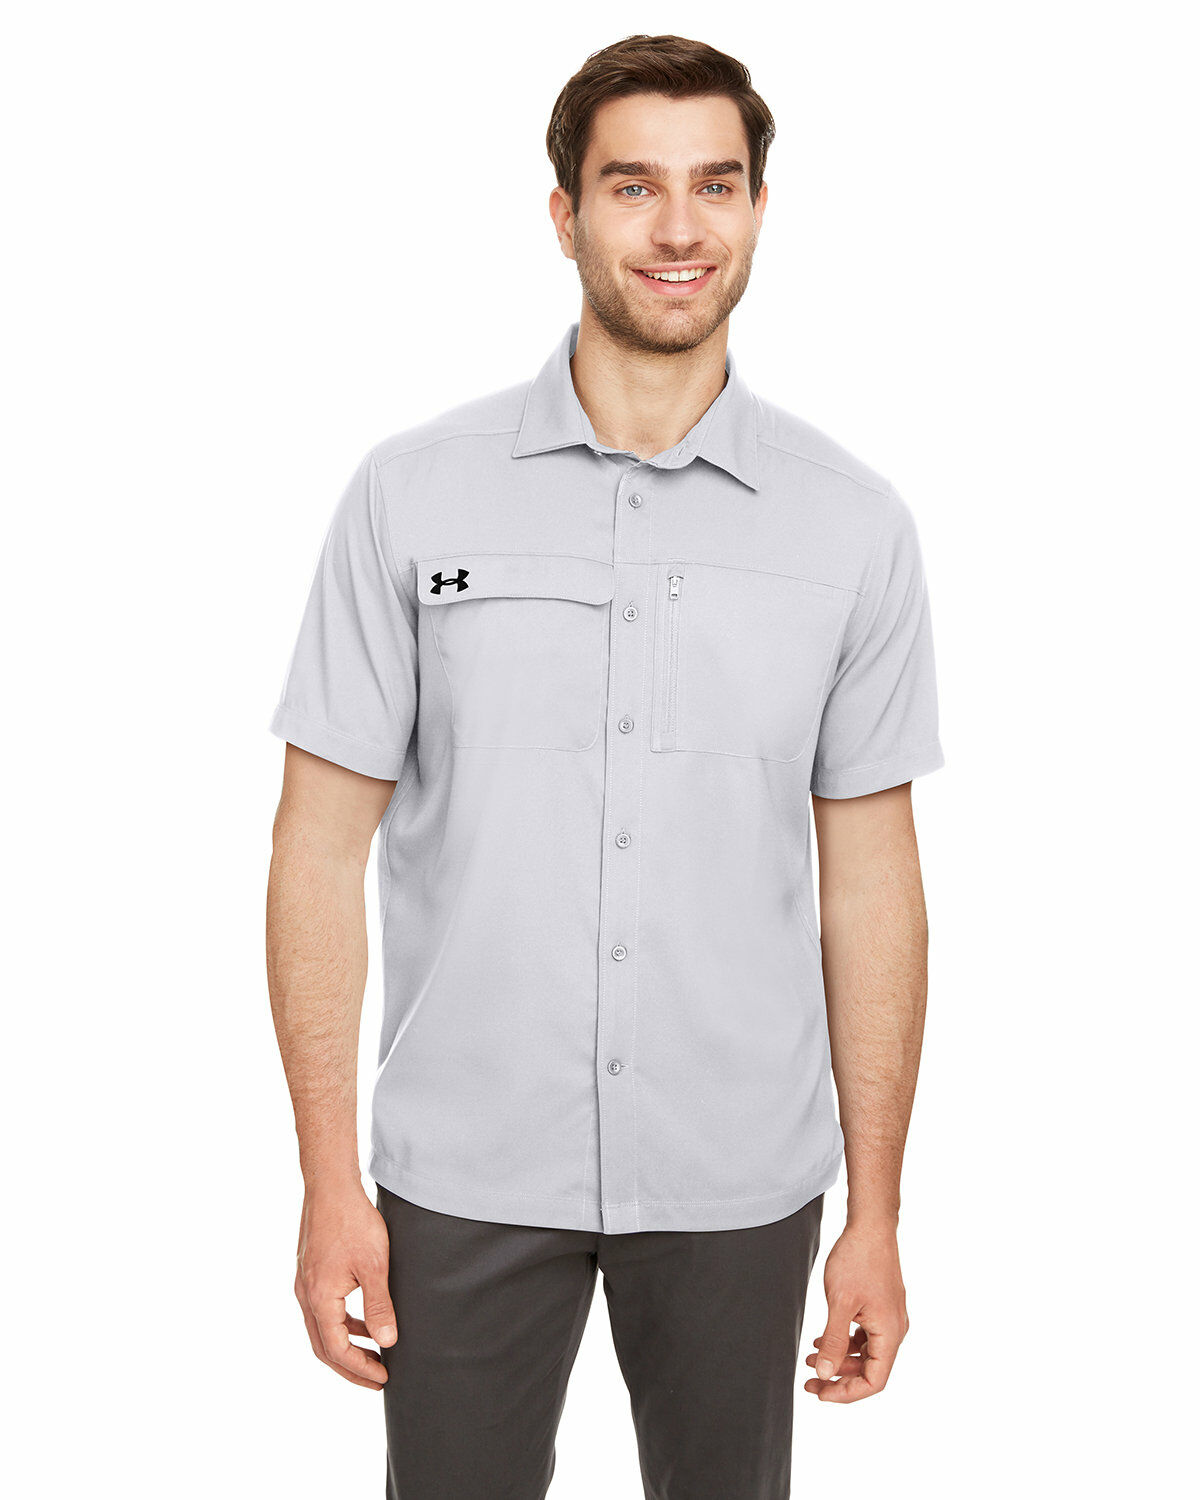 Custom Branded Under Armour Button Up